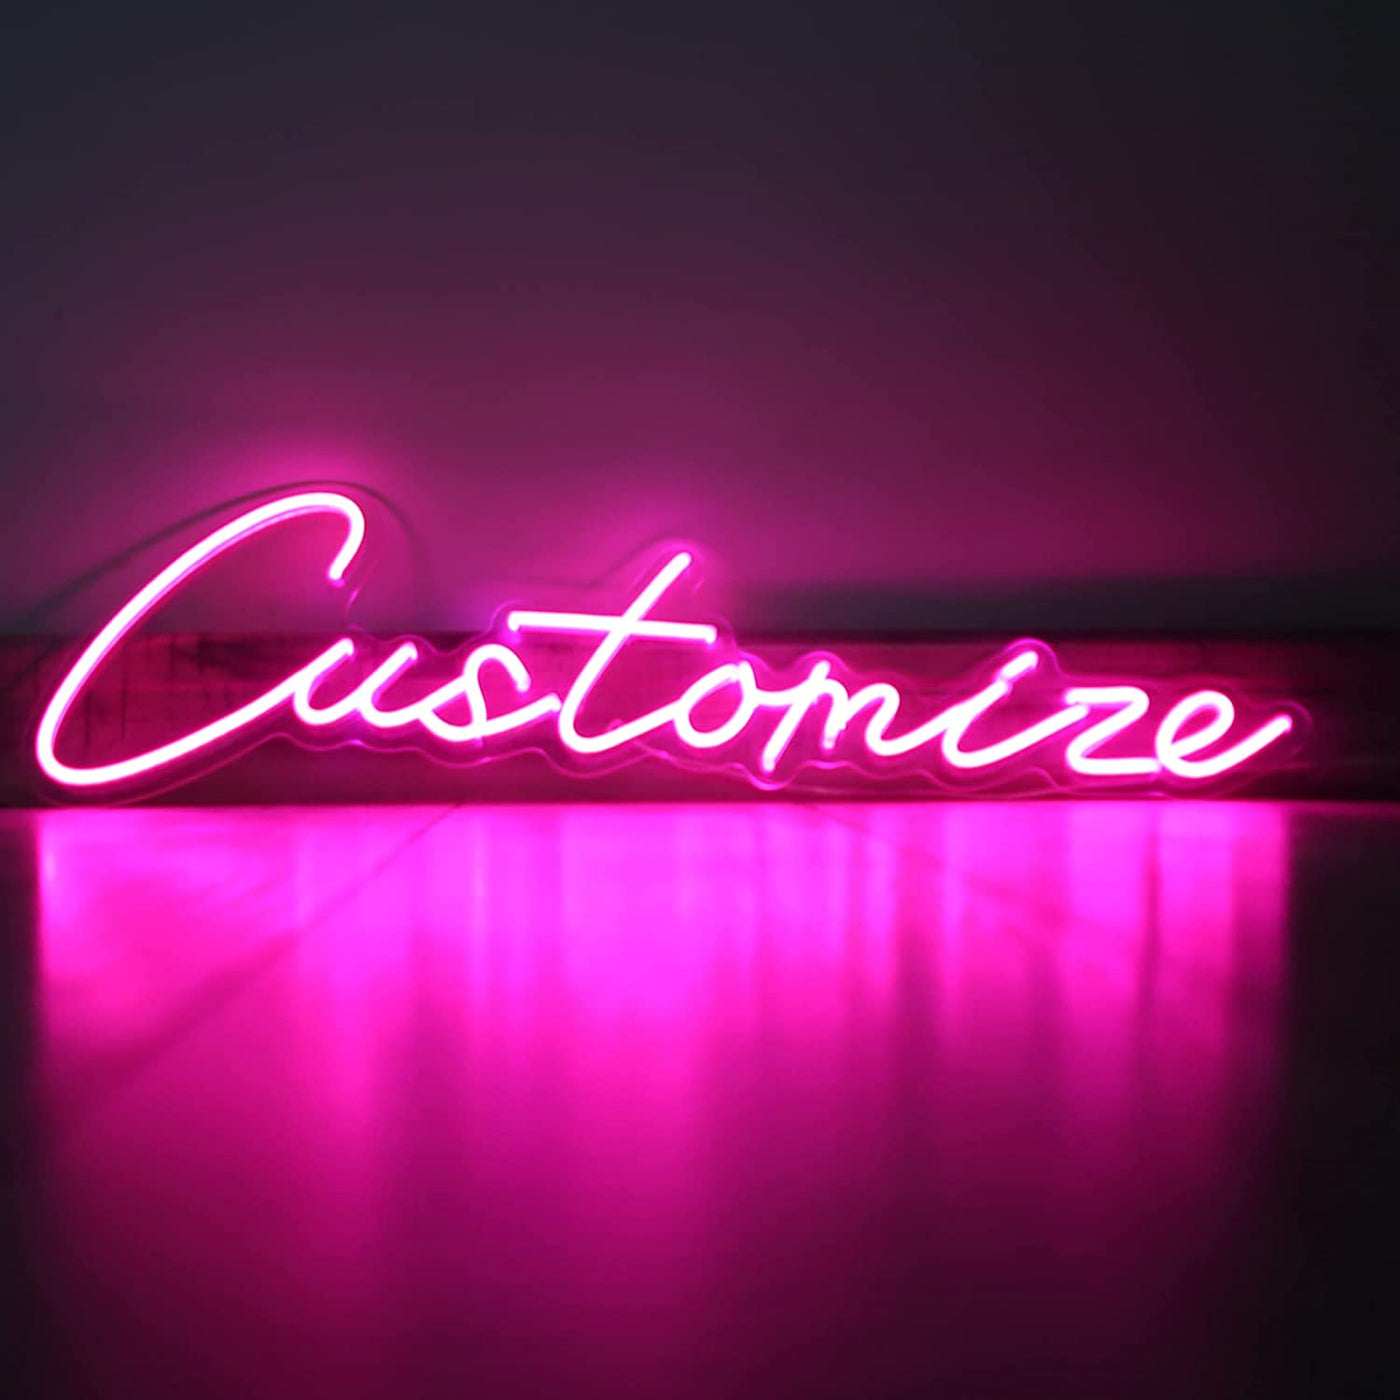 Personalize Neon Sign One Line Text Led Neon Light Sign